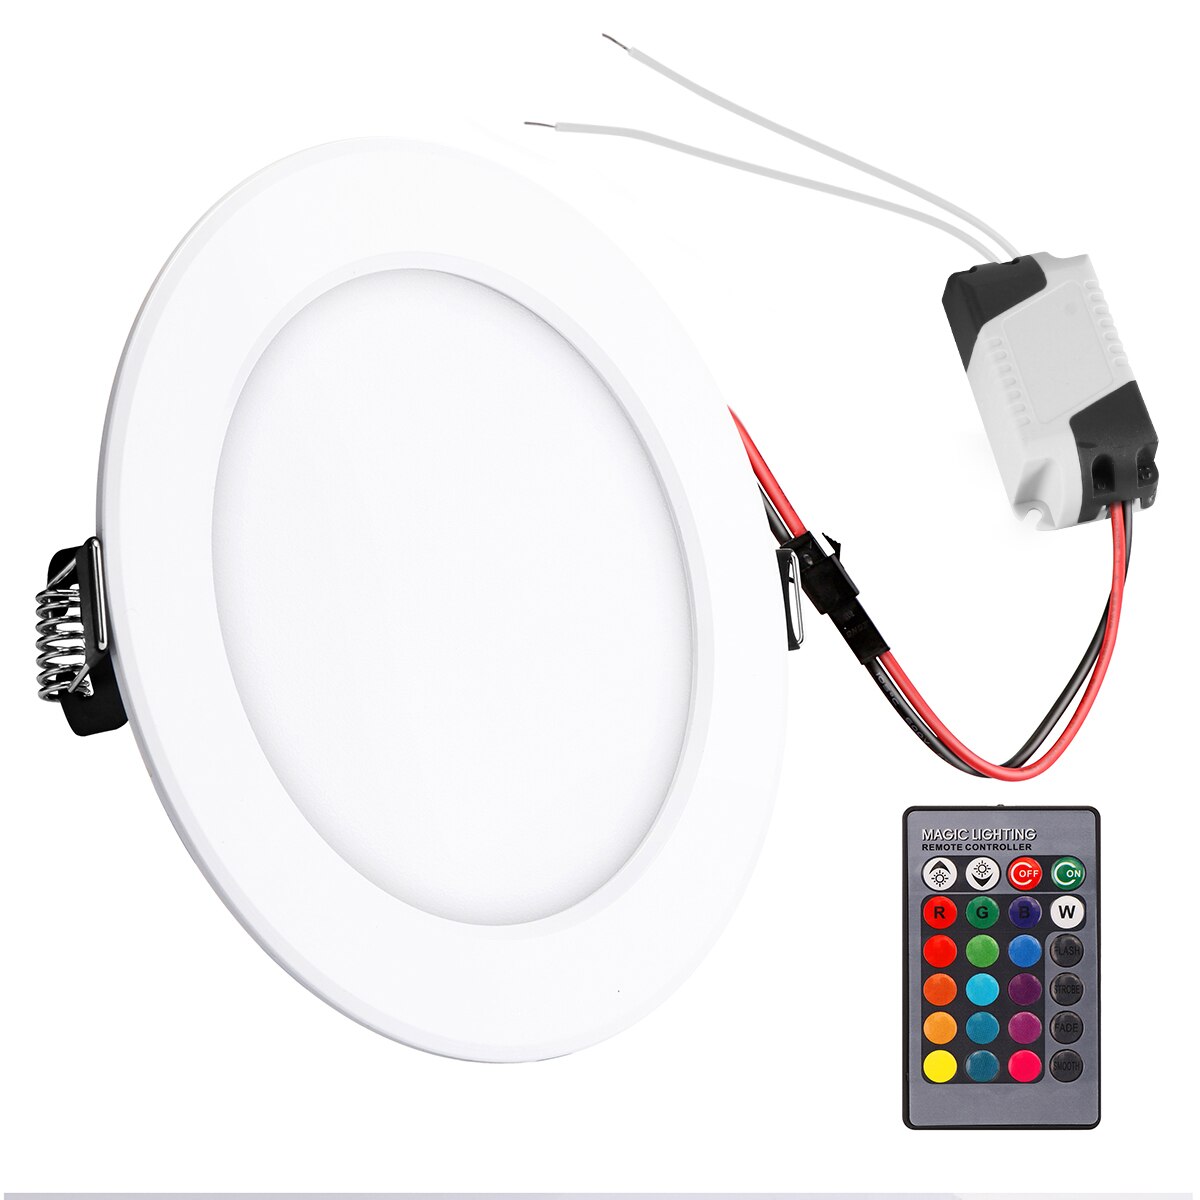 Led Panel Licht 18W Opbouw Ronde Rgbled Plafond Verlichting AC85-265V Ronde Vierkante Led Downlight